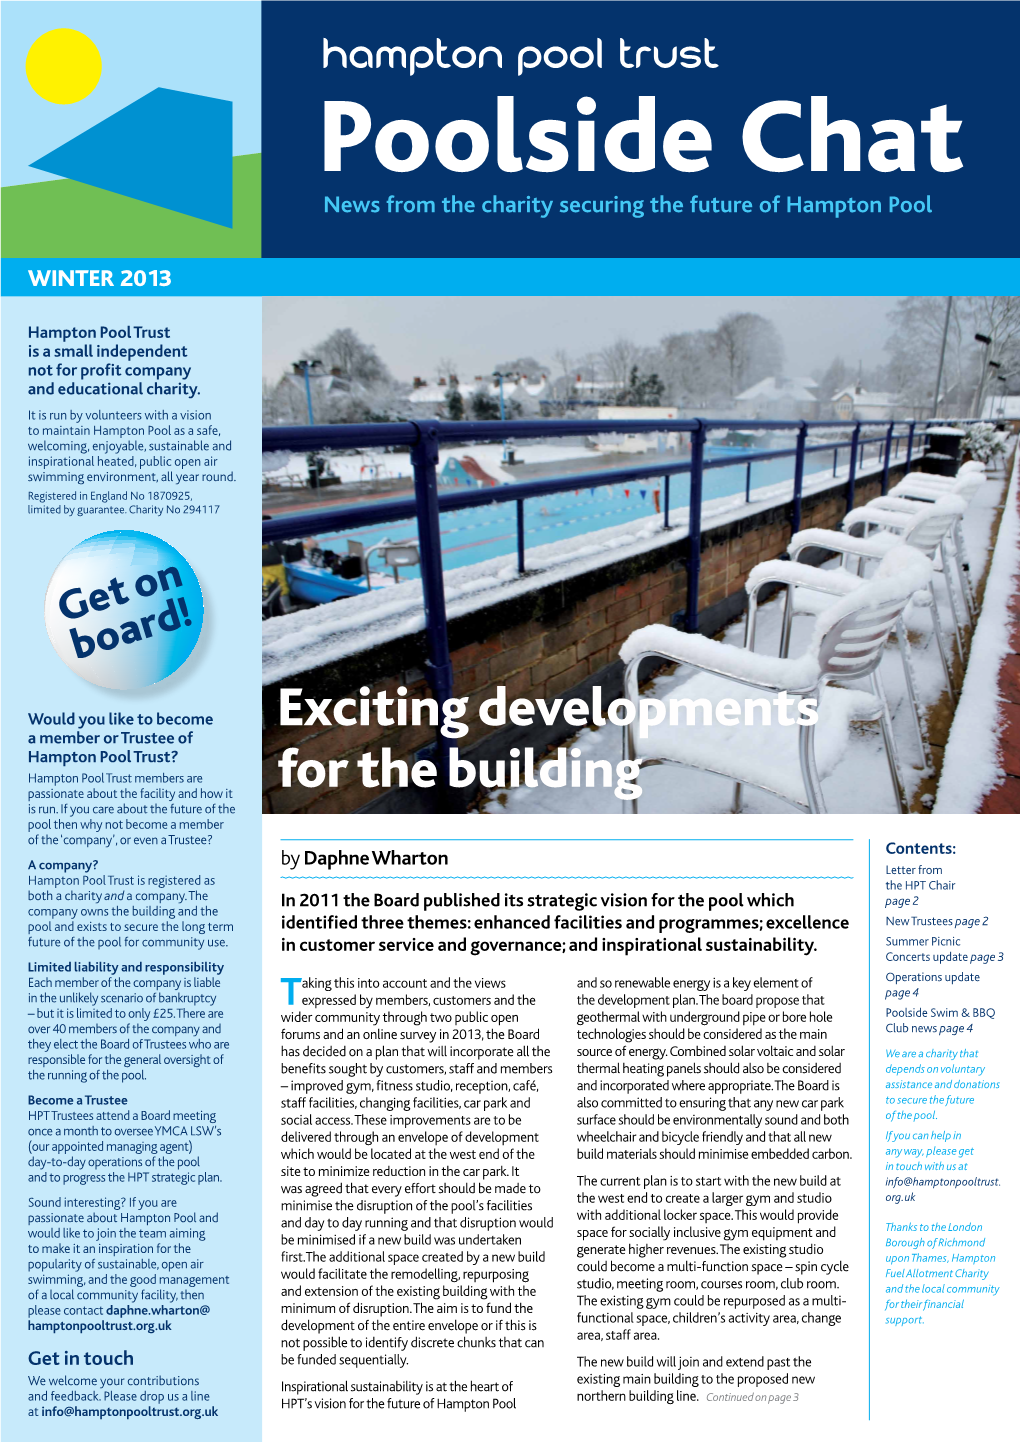 Poolside Chat News from the Charity Securing the Future of Hampton Pool